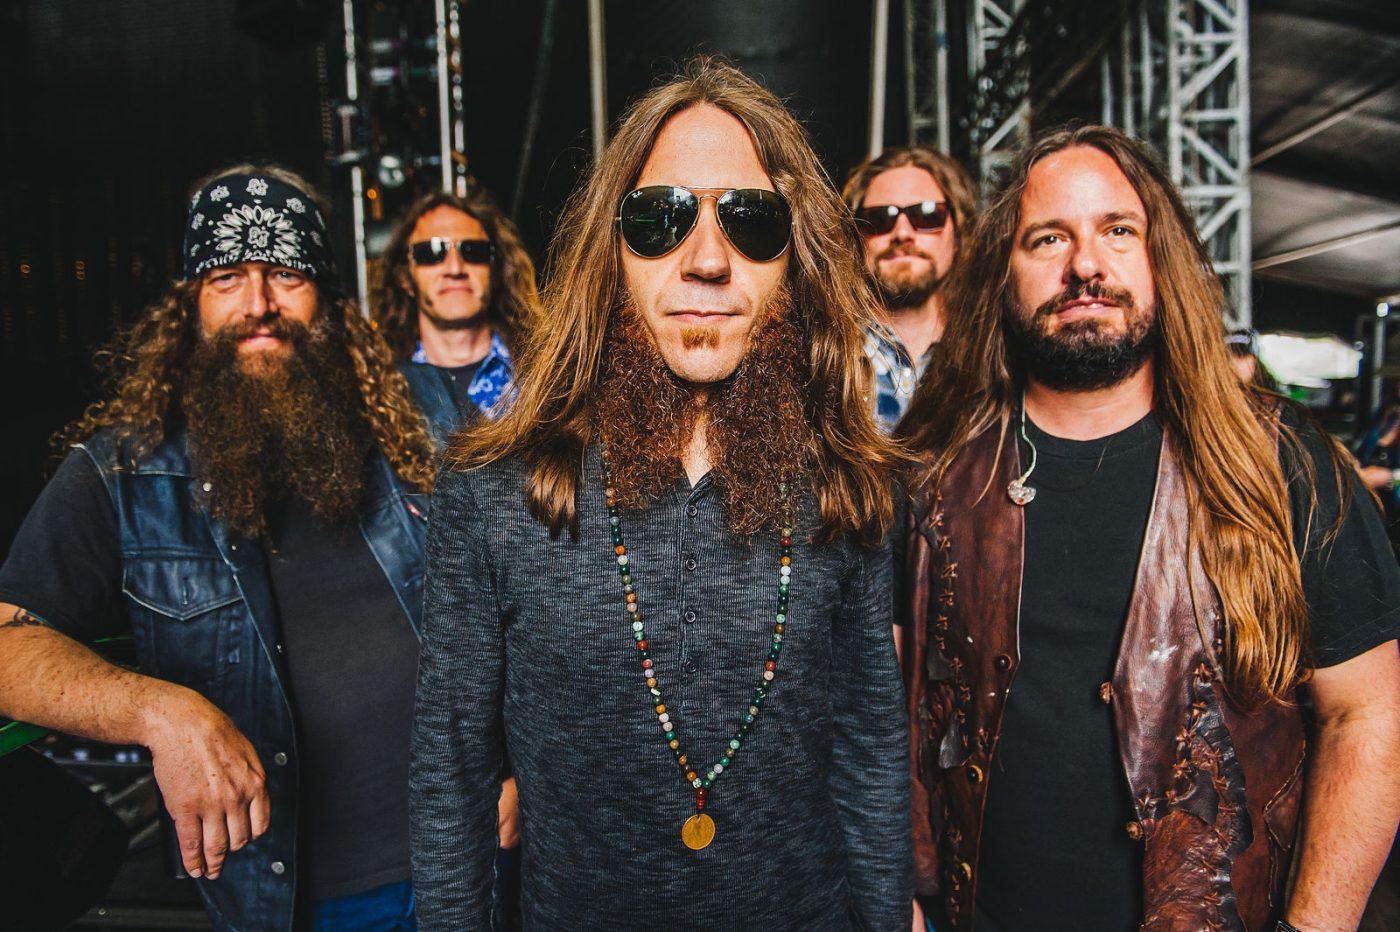 Blackberry Smoke toca ‘Used to Love Her’, do Guns N’ Roses, com Richard Fortus; assista